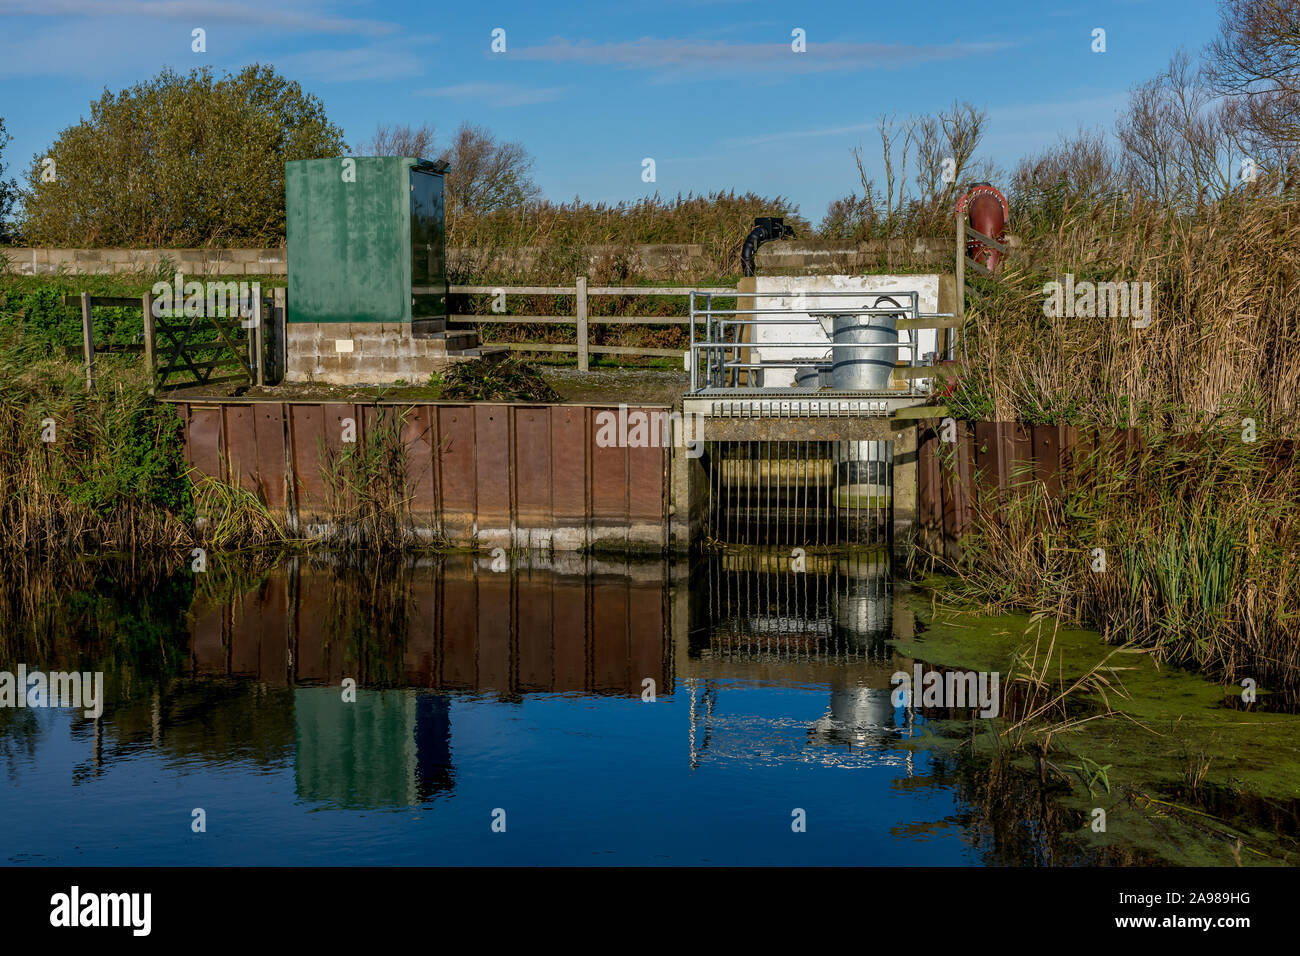 Lowland pumping station used to transfer water between the River Waveney and Carlton Marsh wetland reserve and as a flood prevention scheme Stock Photo